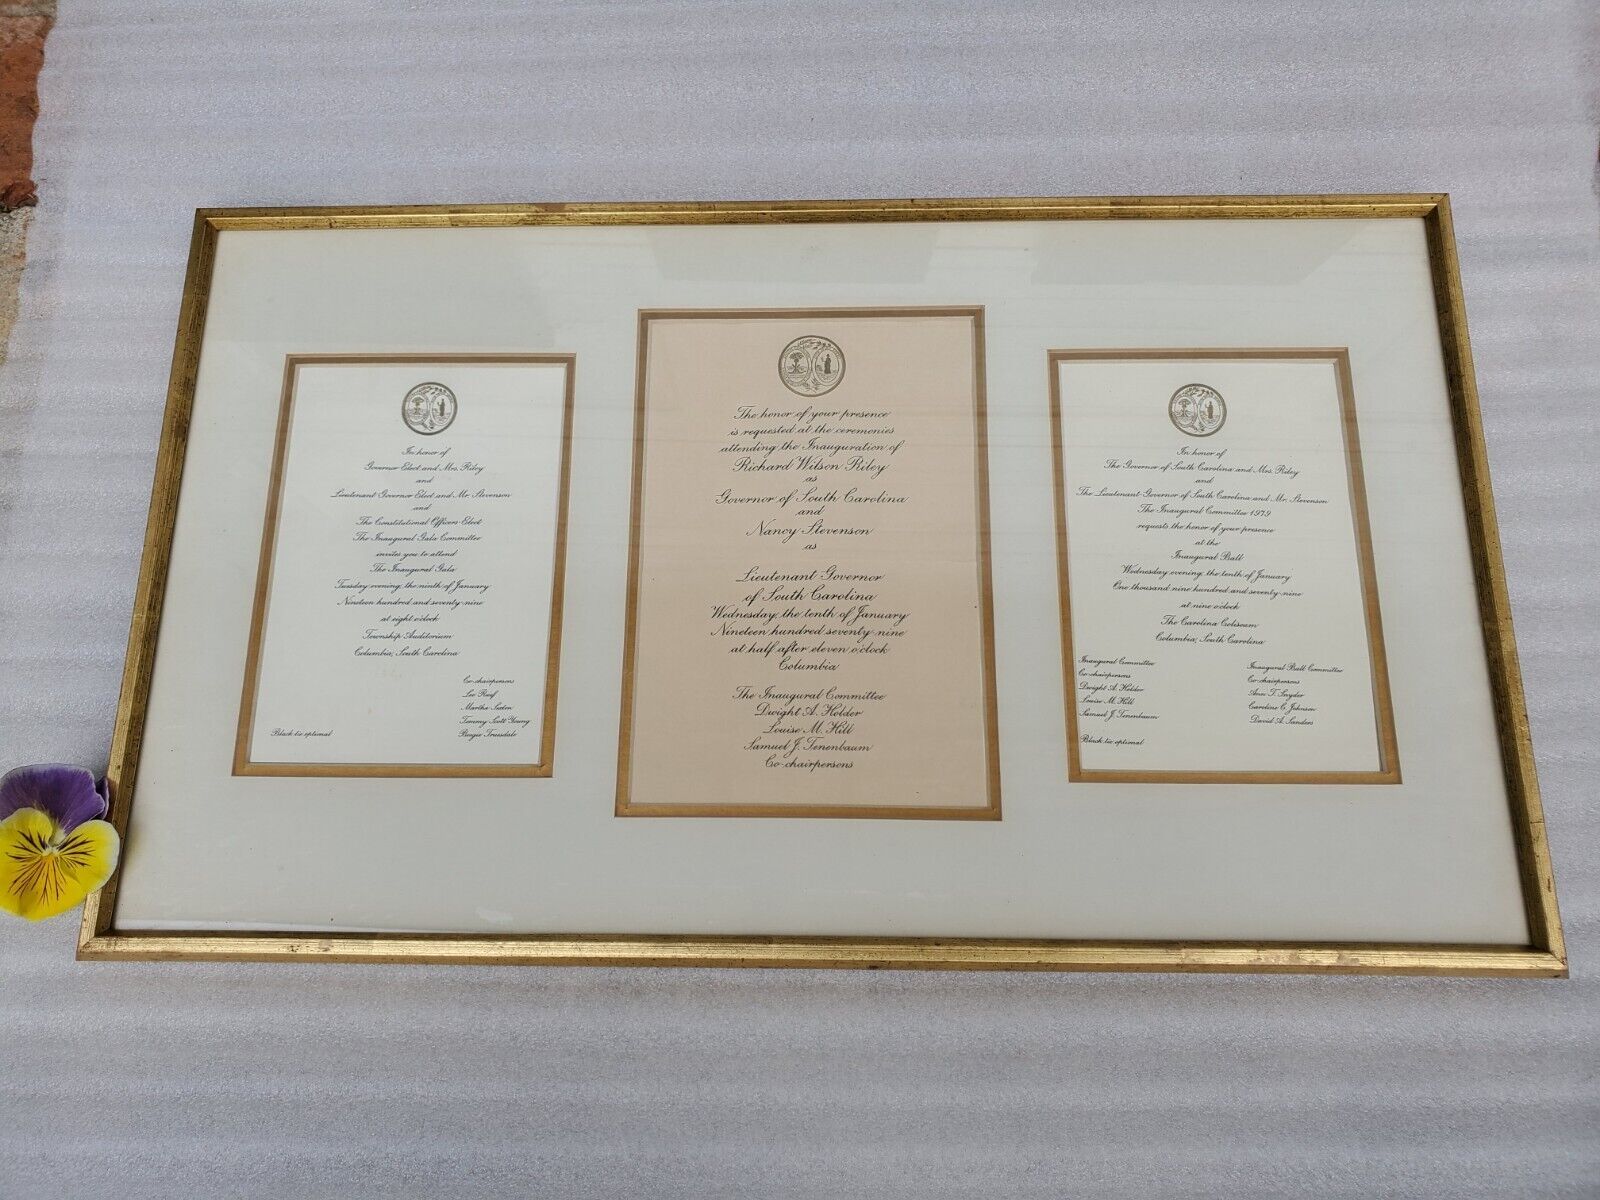 RICHARD (DICK) RILEY GOVERNOR OF SC 1979 INARGUARAL INVITATIONS, FRAMED